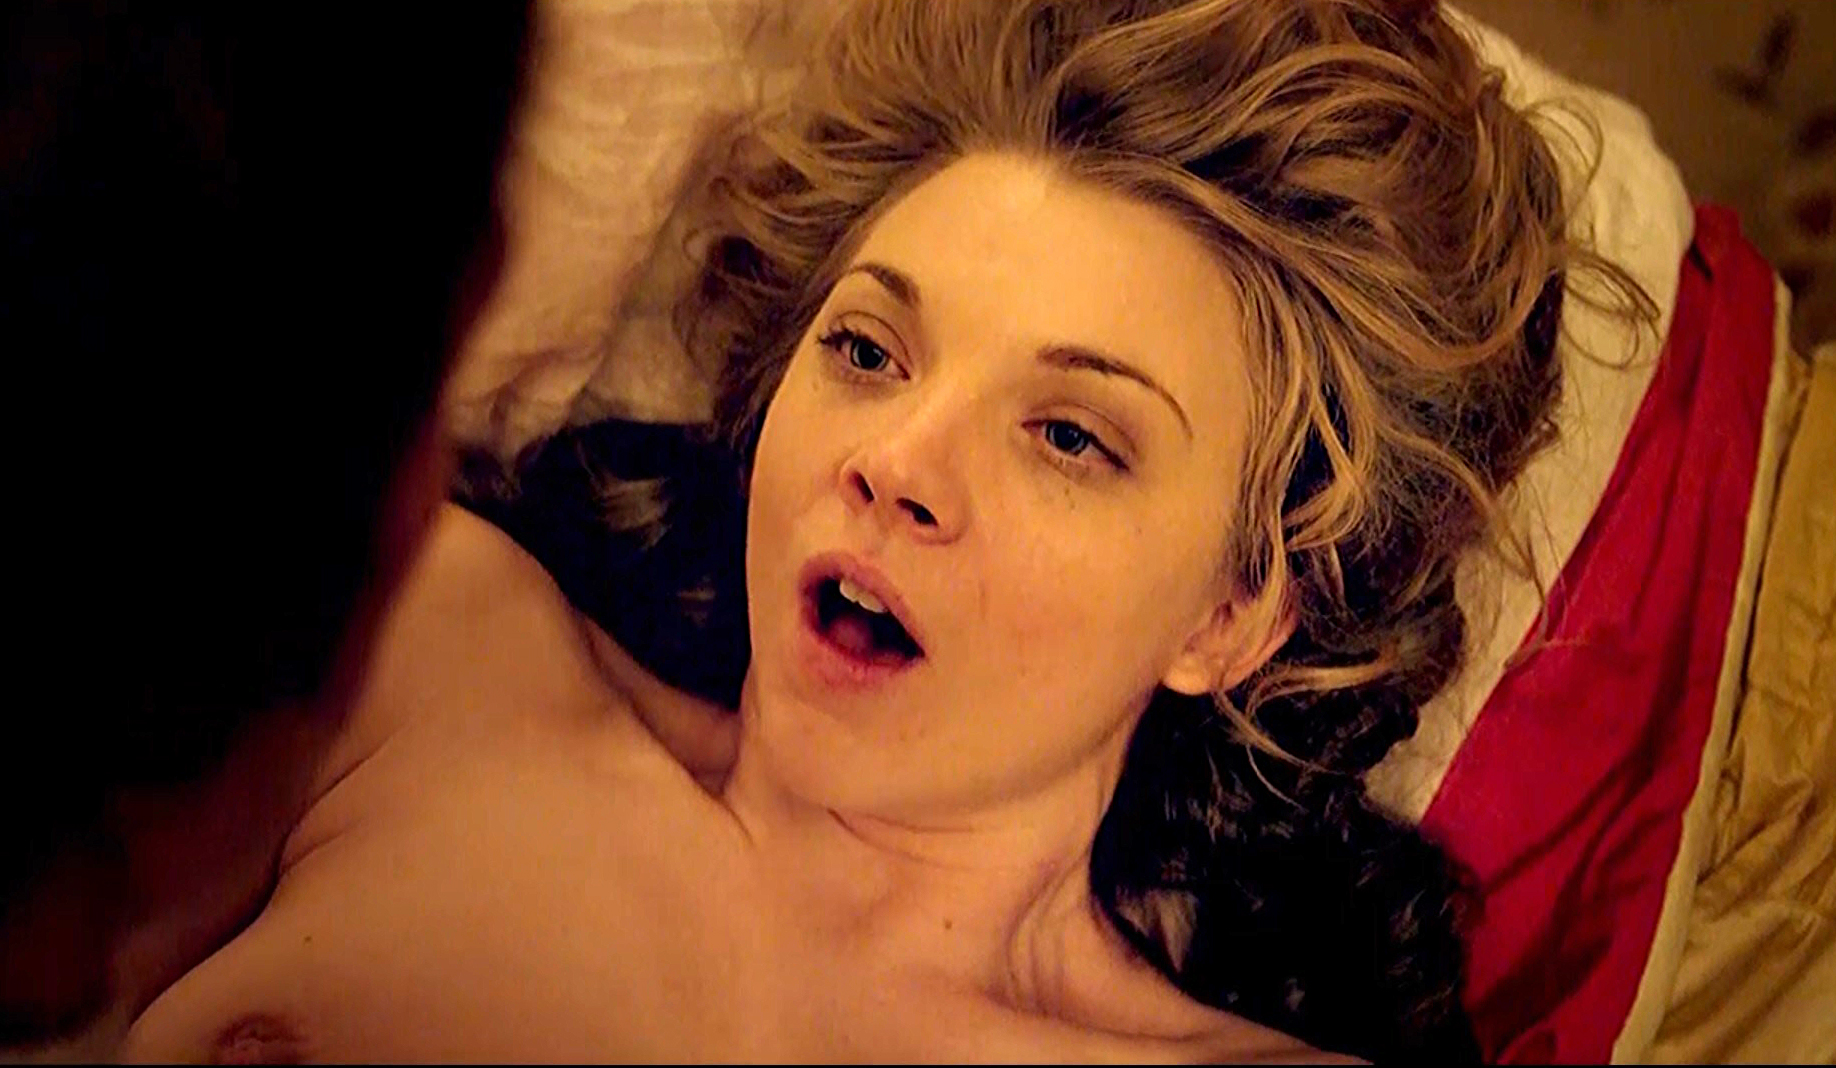 A great nude sex scene from The Scandalous Lady W. View All Natalie Dormer Nude...